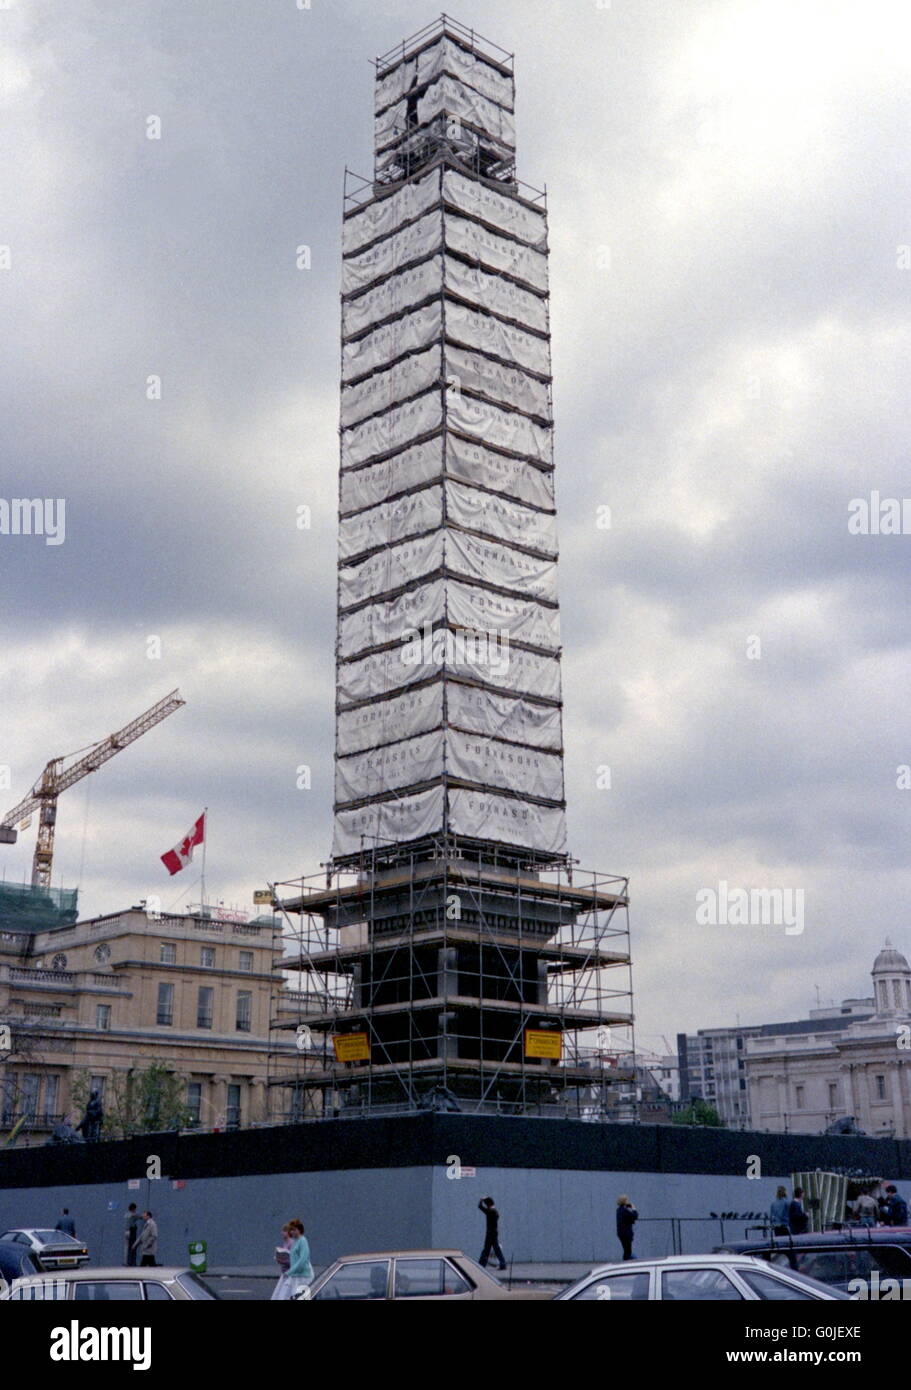 AJAXNETPHOTO. 1987. LONDON, ENGLAND. - NELSON'S COLUMN - SURROUNDED BY SCAFFOLDING AS IT UNDERGOES A CLEAN. PHOTO:JONATHAN EASTLAND/AJAX  REF:1987RSE34A002 Stock Photo